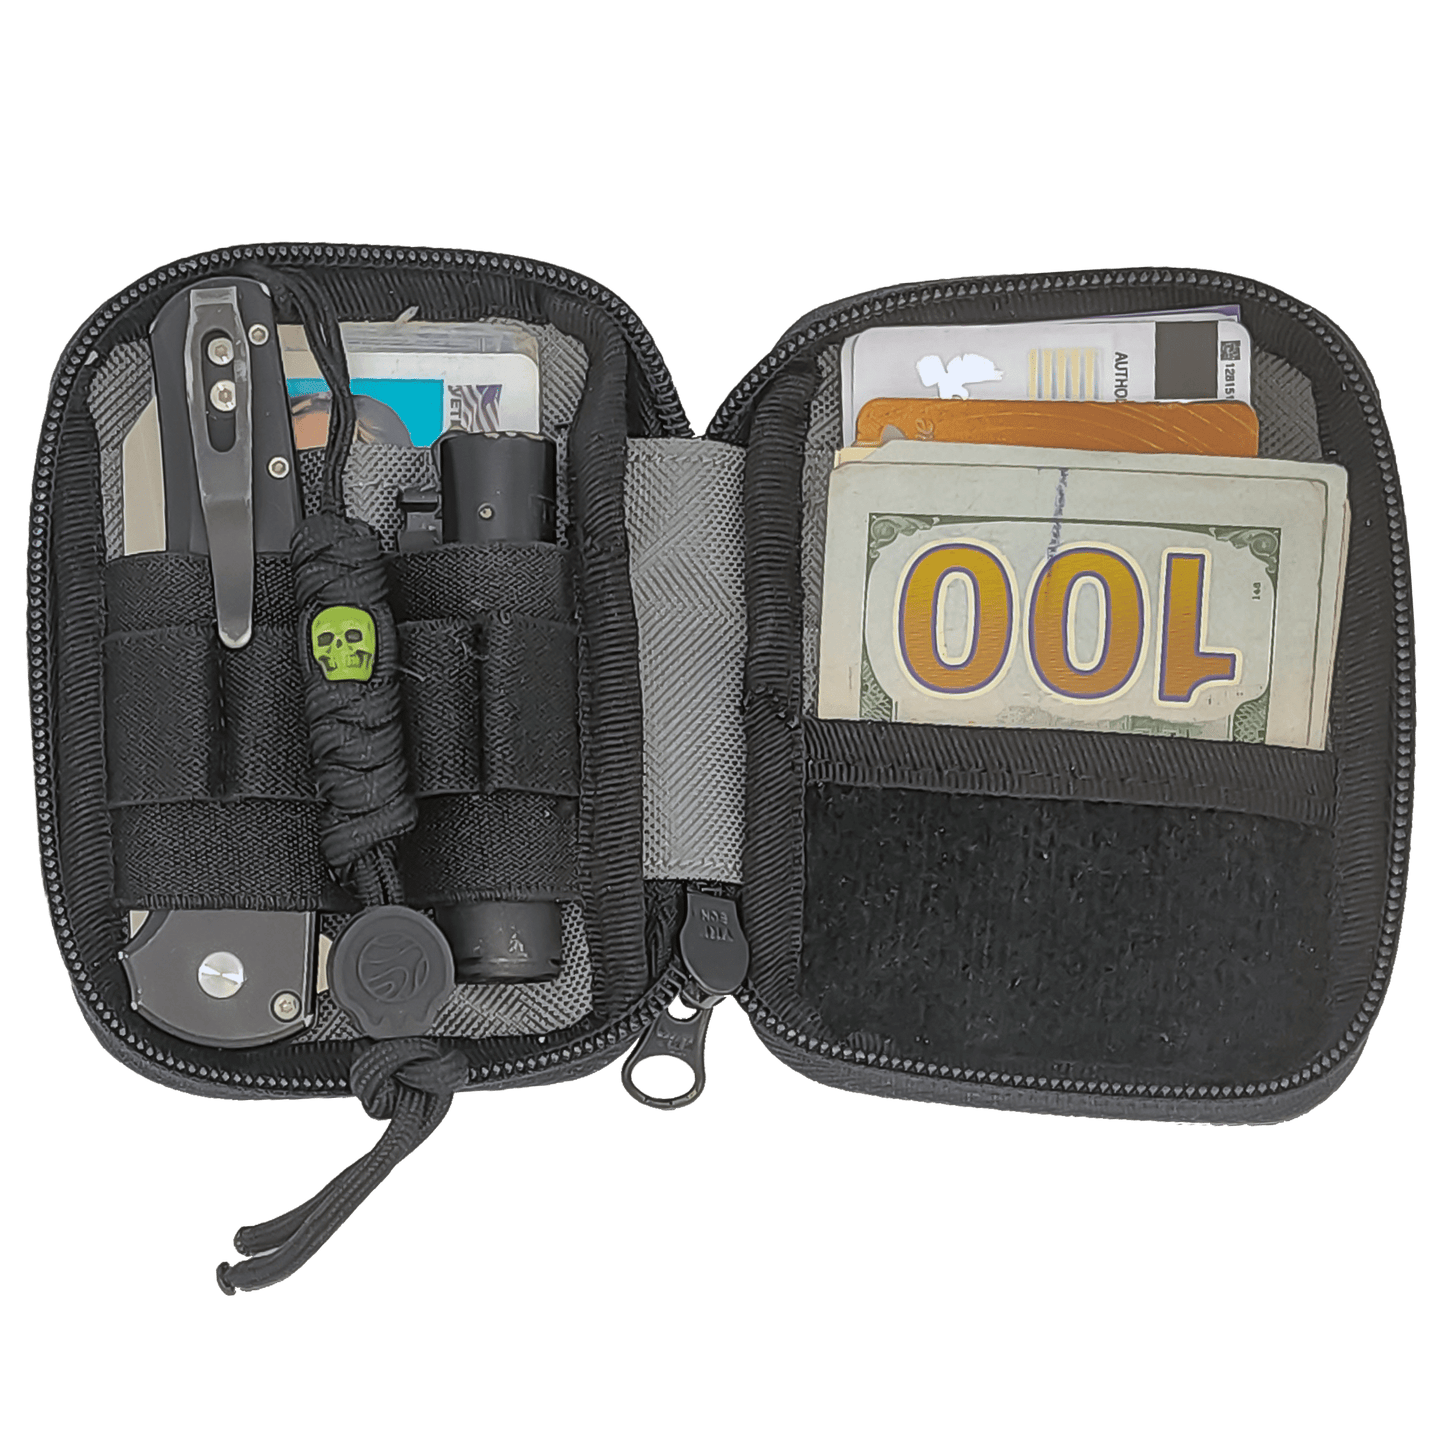 Open grey Micro Pouch showing organized contents, including a knife, lighter, pen, and cash.